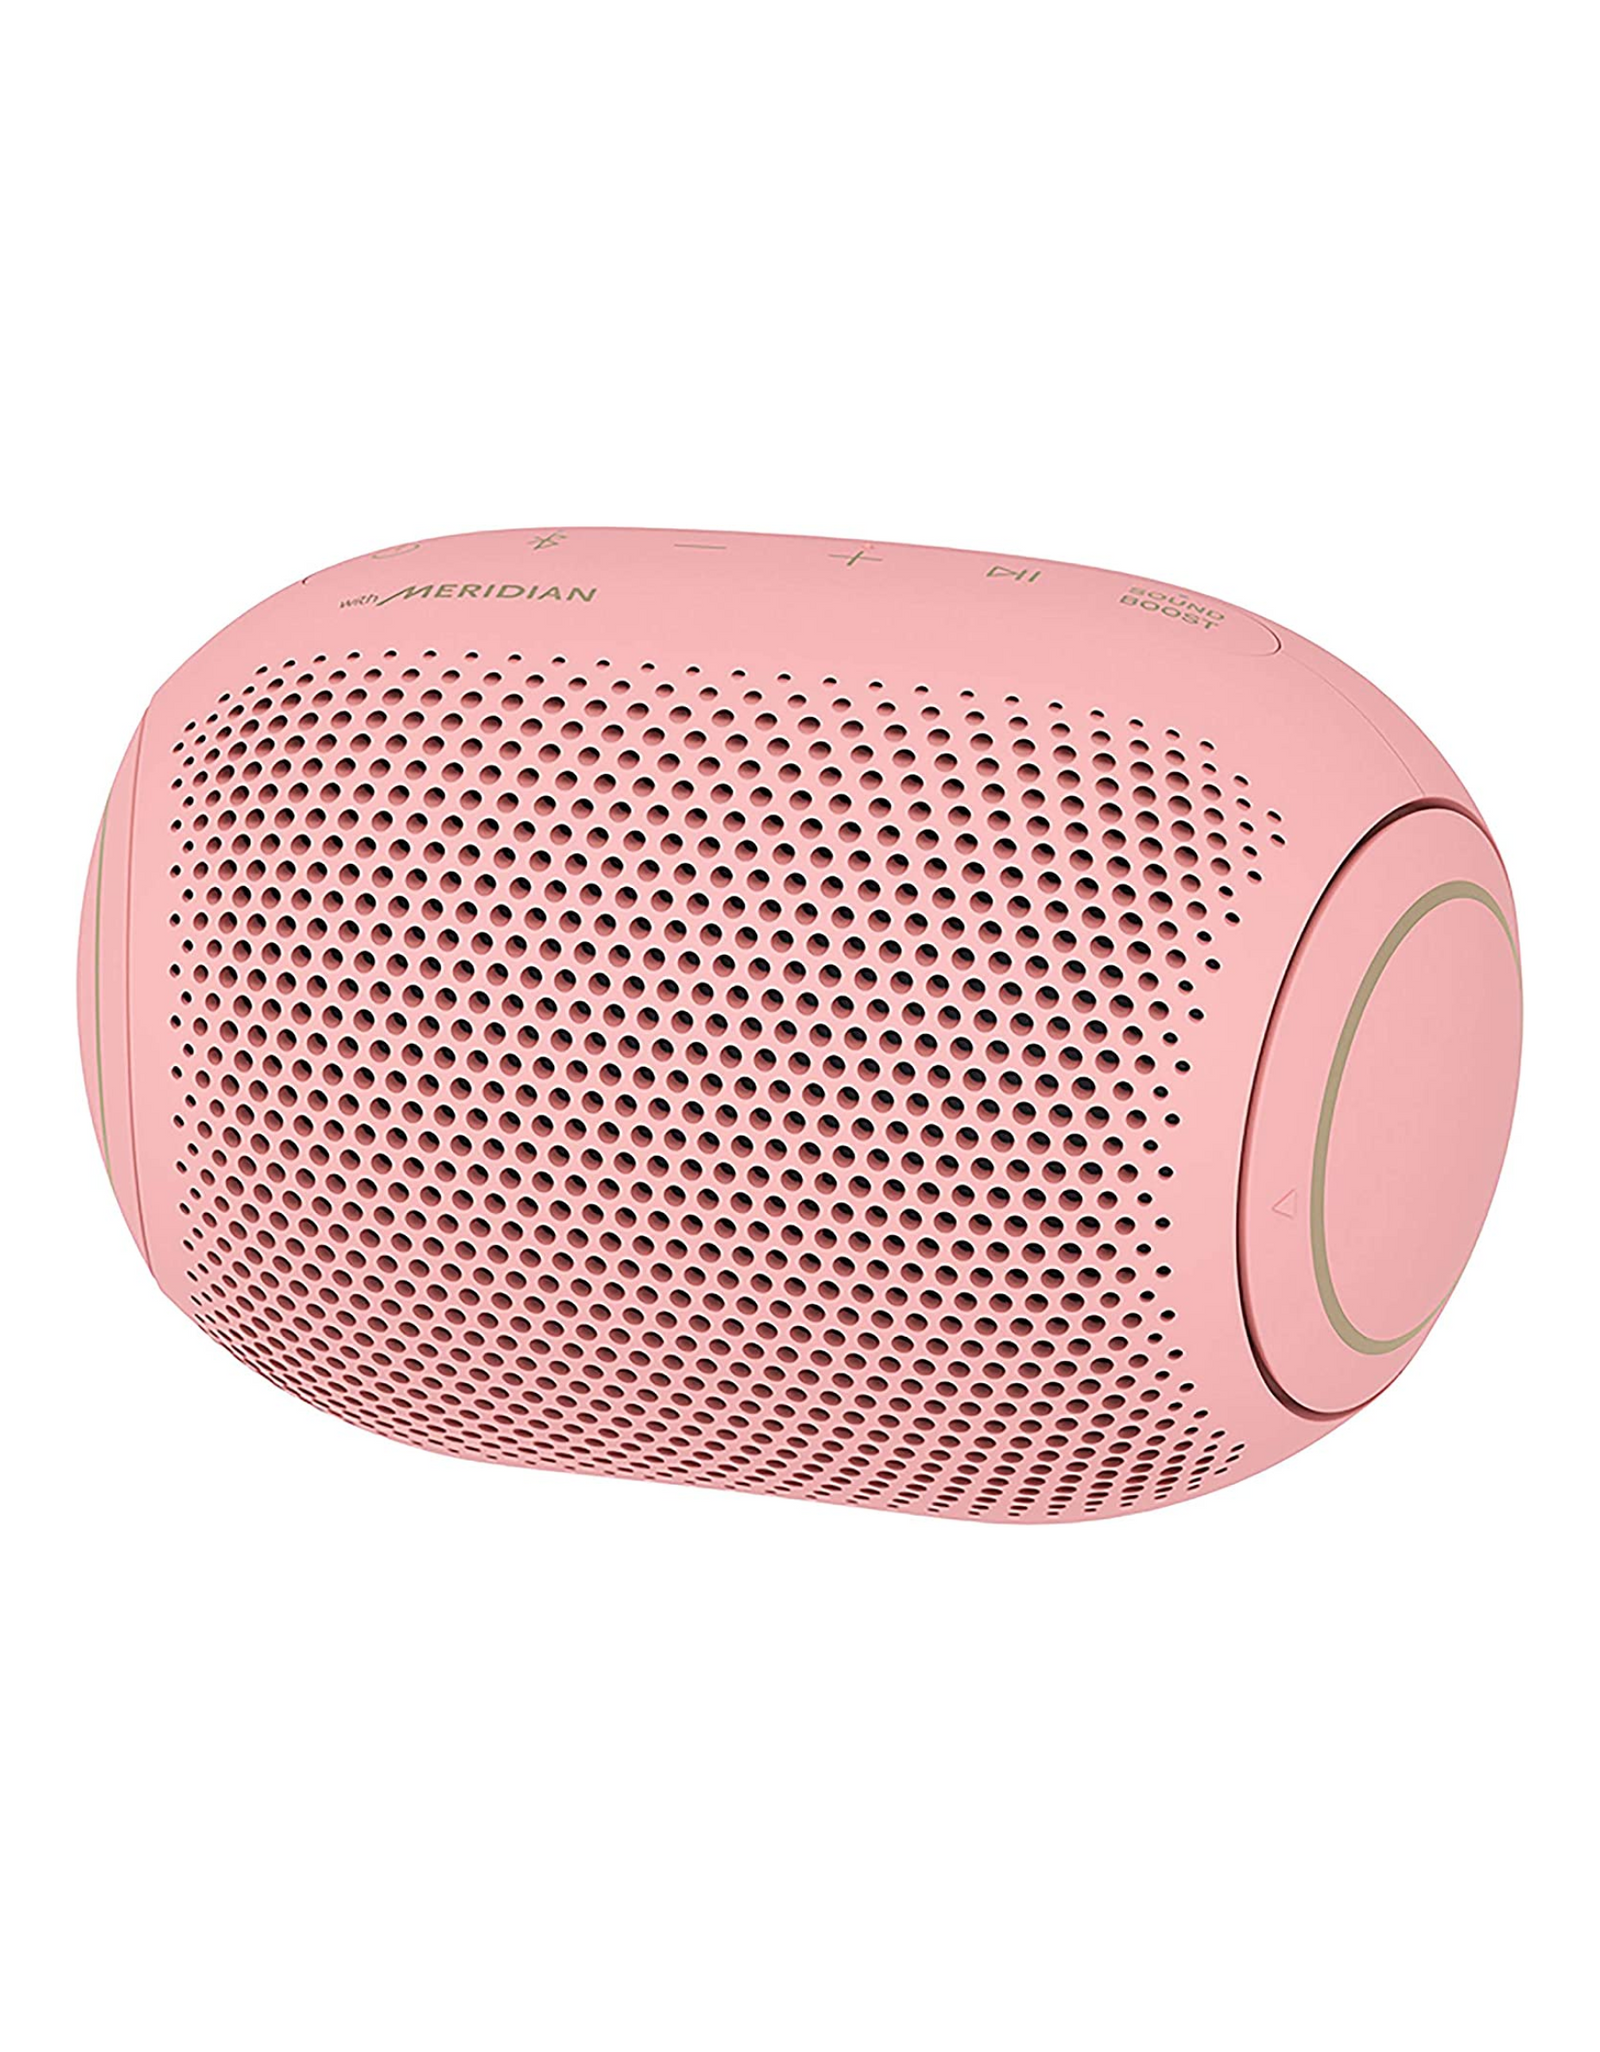 LG PL2P XBOOM Go Water-Resistant Wireless Bluetooth Party Speaker, Bubble Gum Pink